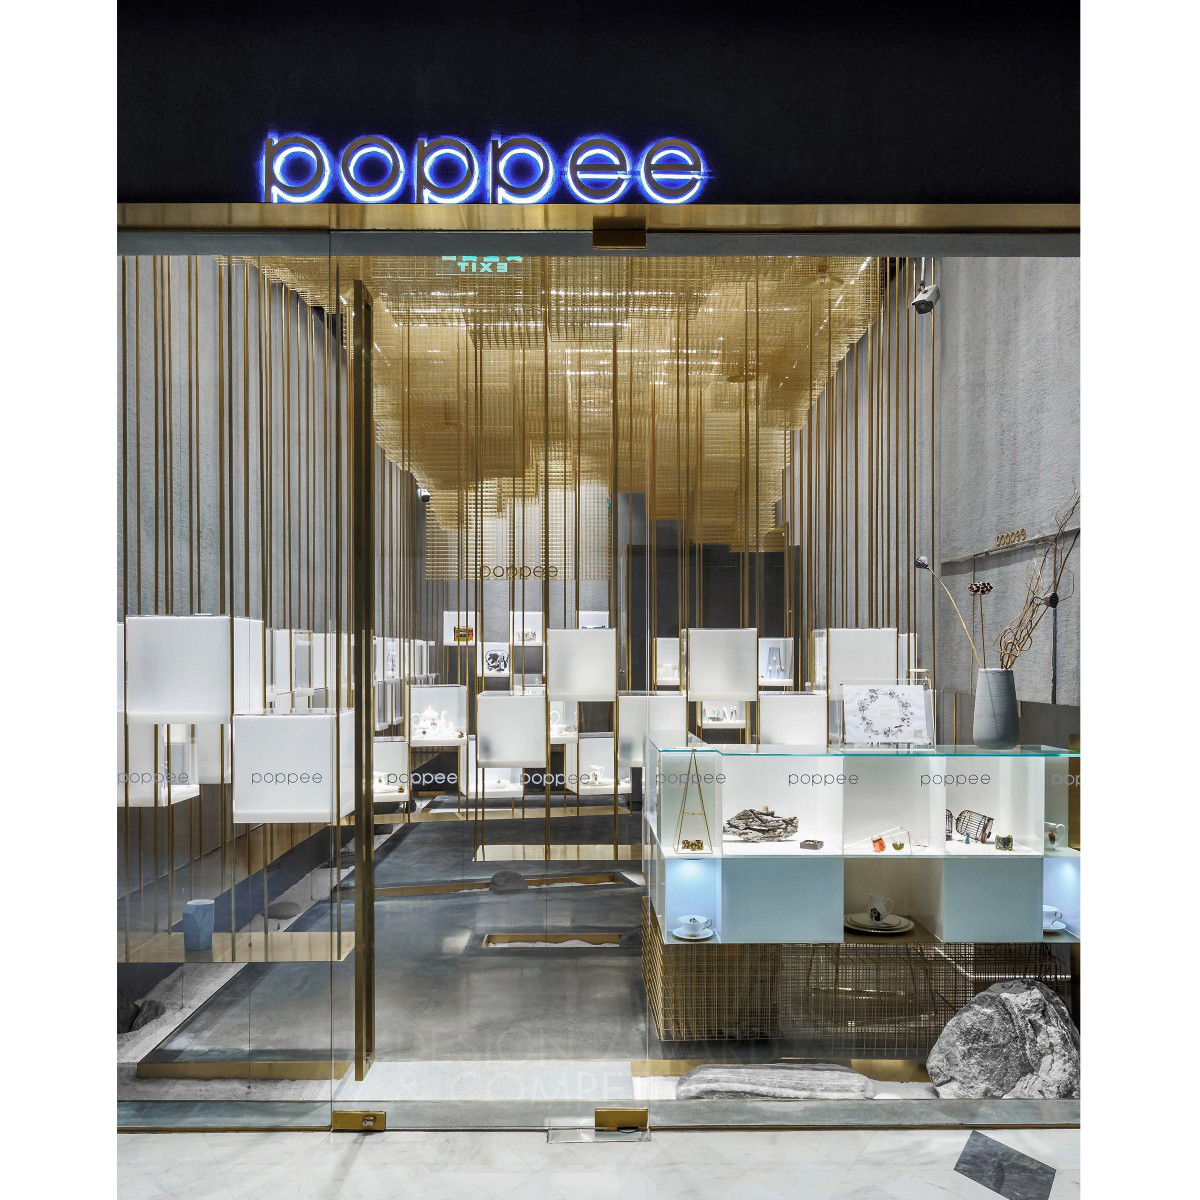 Poppee Retail Space by CHU CHIH-KANG + CHANG HO DESIGN